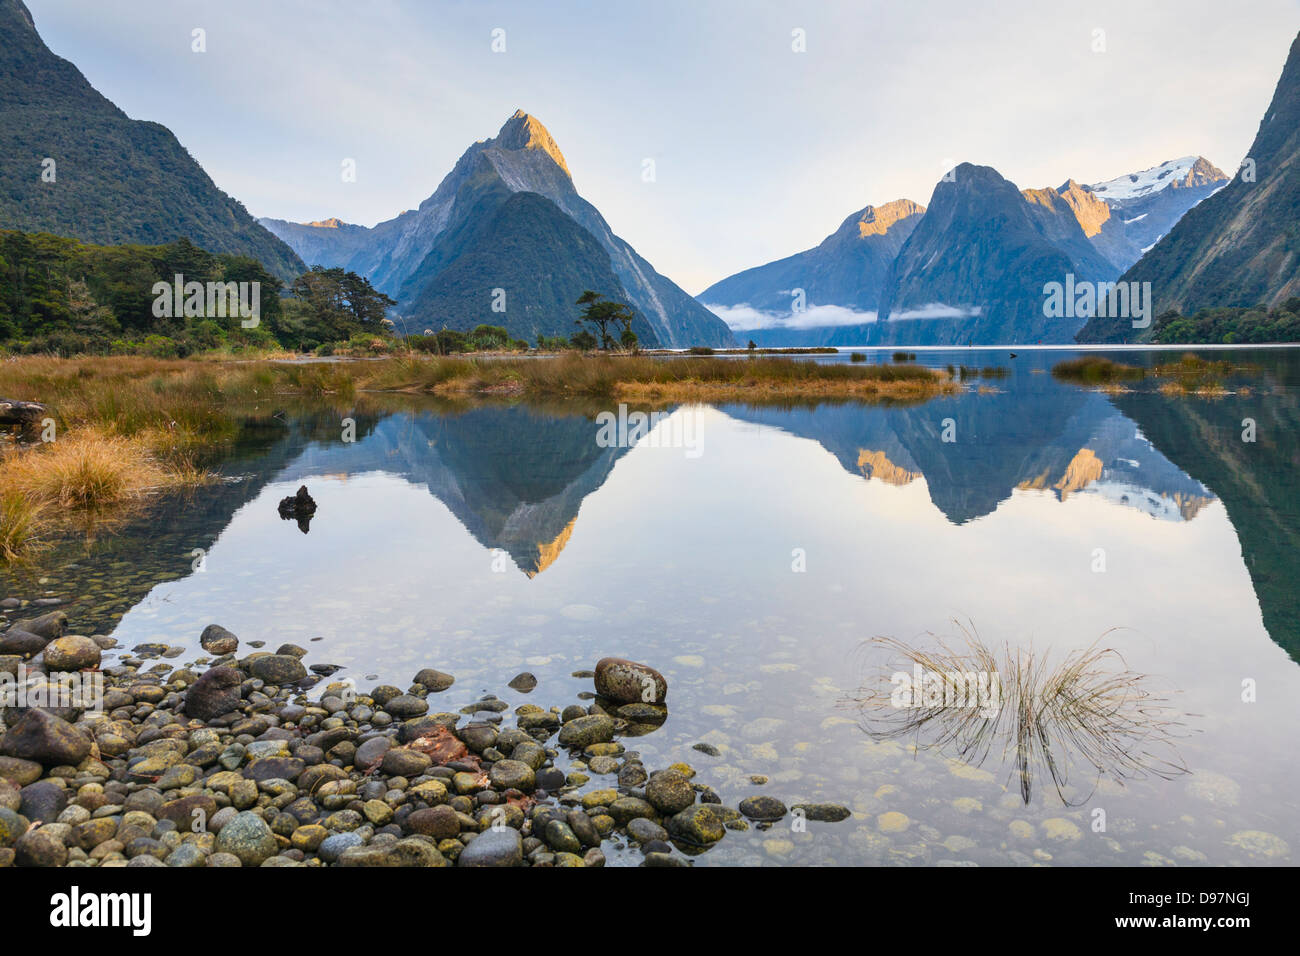 First light on Mitre Peak and surrounding mountains at Milford Sound, Fiordland, in New Zealand's South Island. Stock Photo